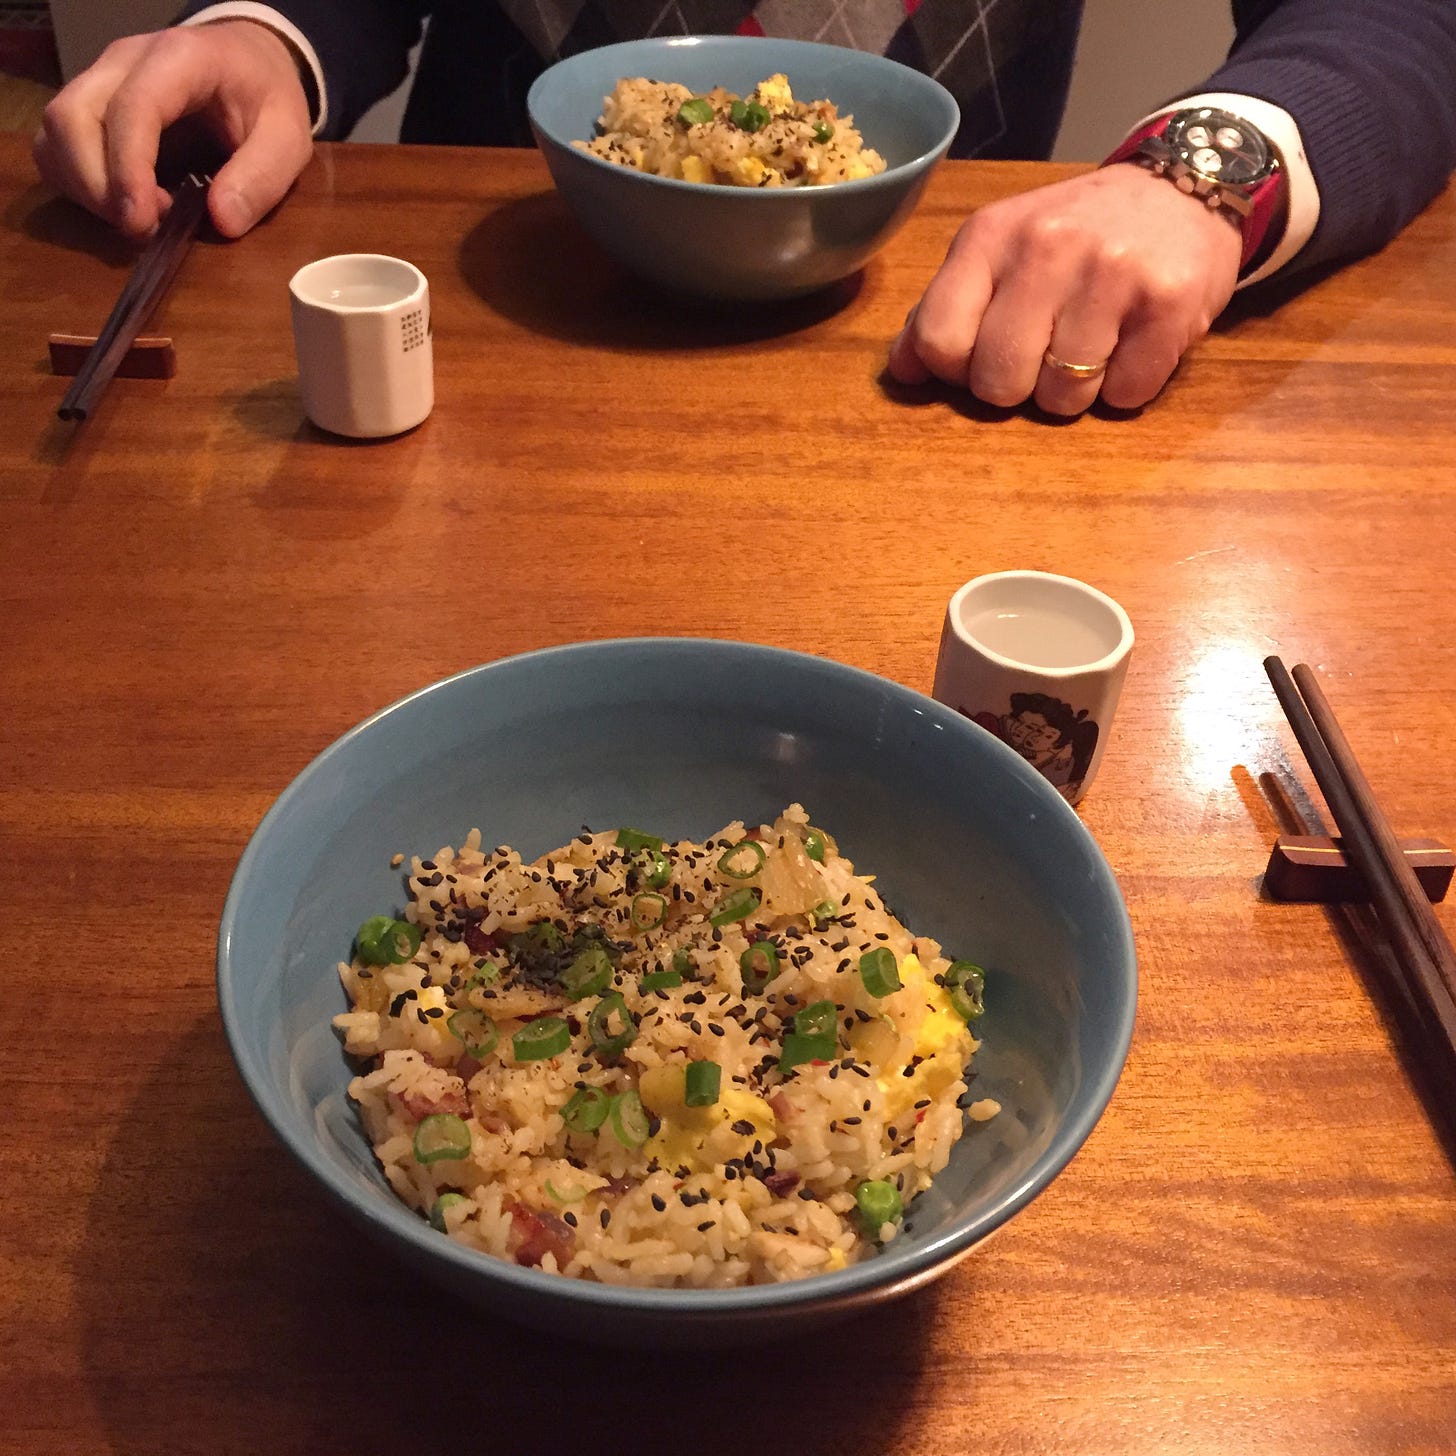 Two blue bowls of fried rice topped with black sesame seeds and green onions. Next to the bowls are wooden chopsticks and two small white cups of soju.